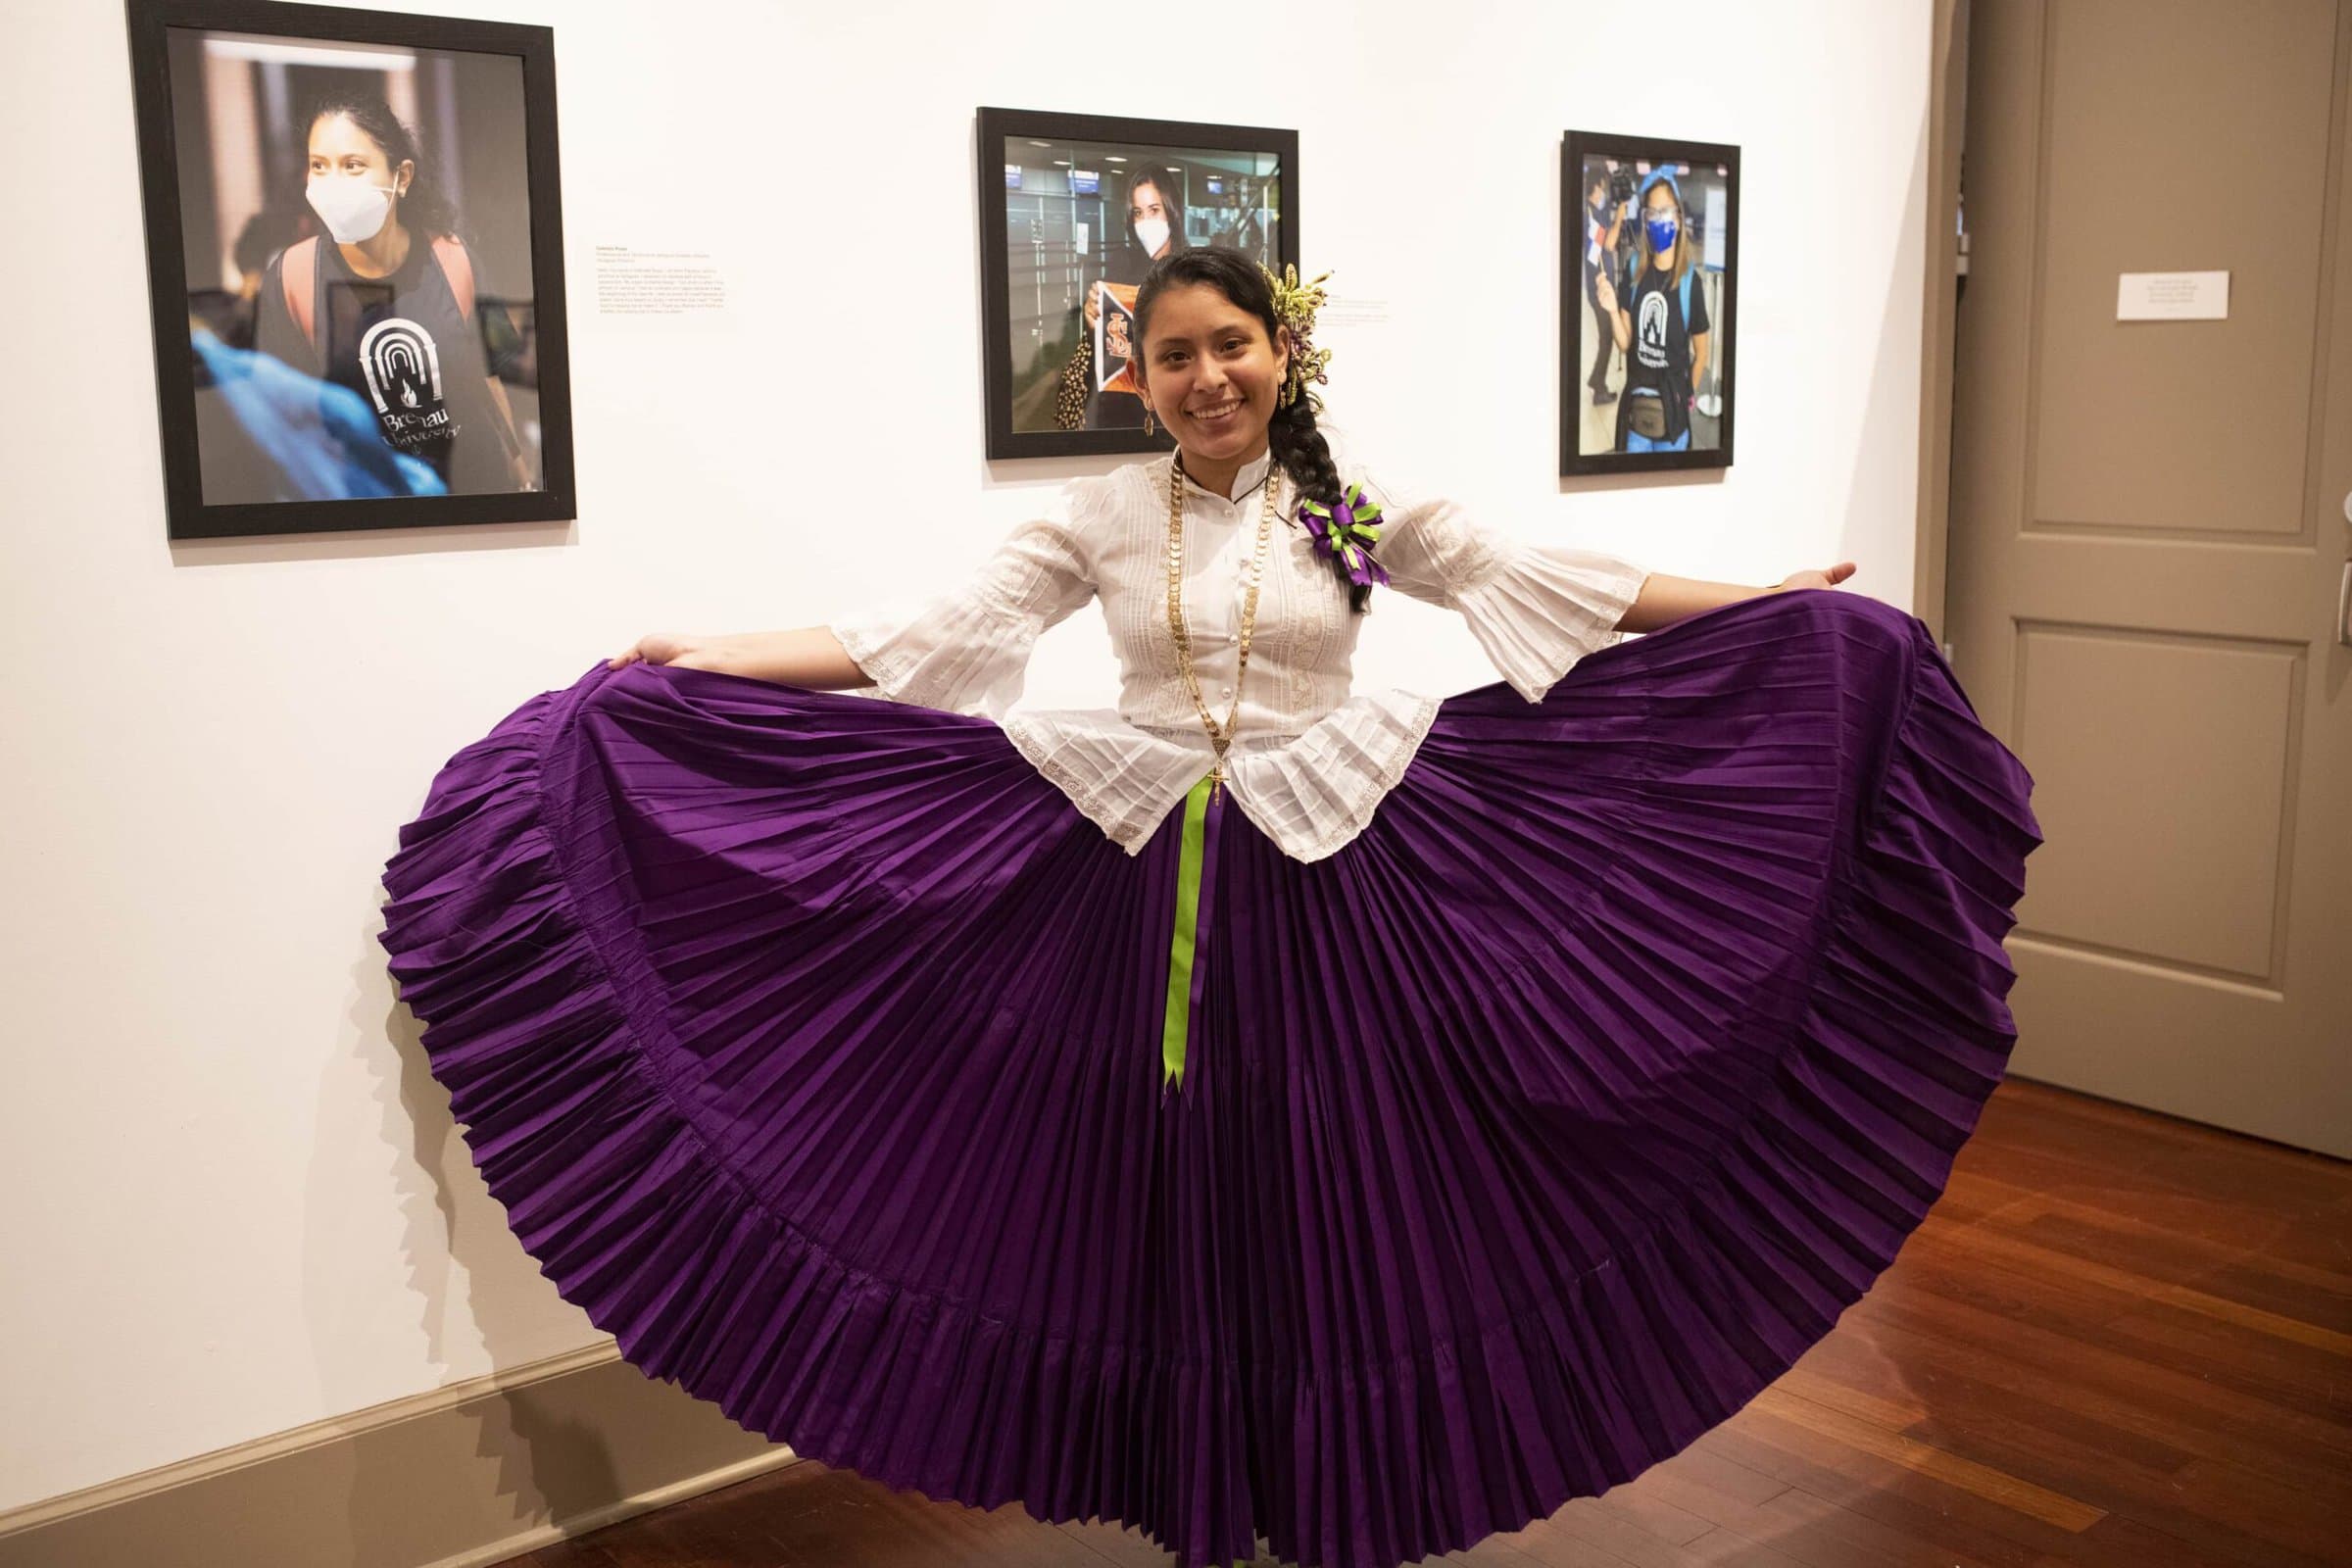 Panamanian Student in traditional dress at art gallery